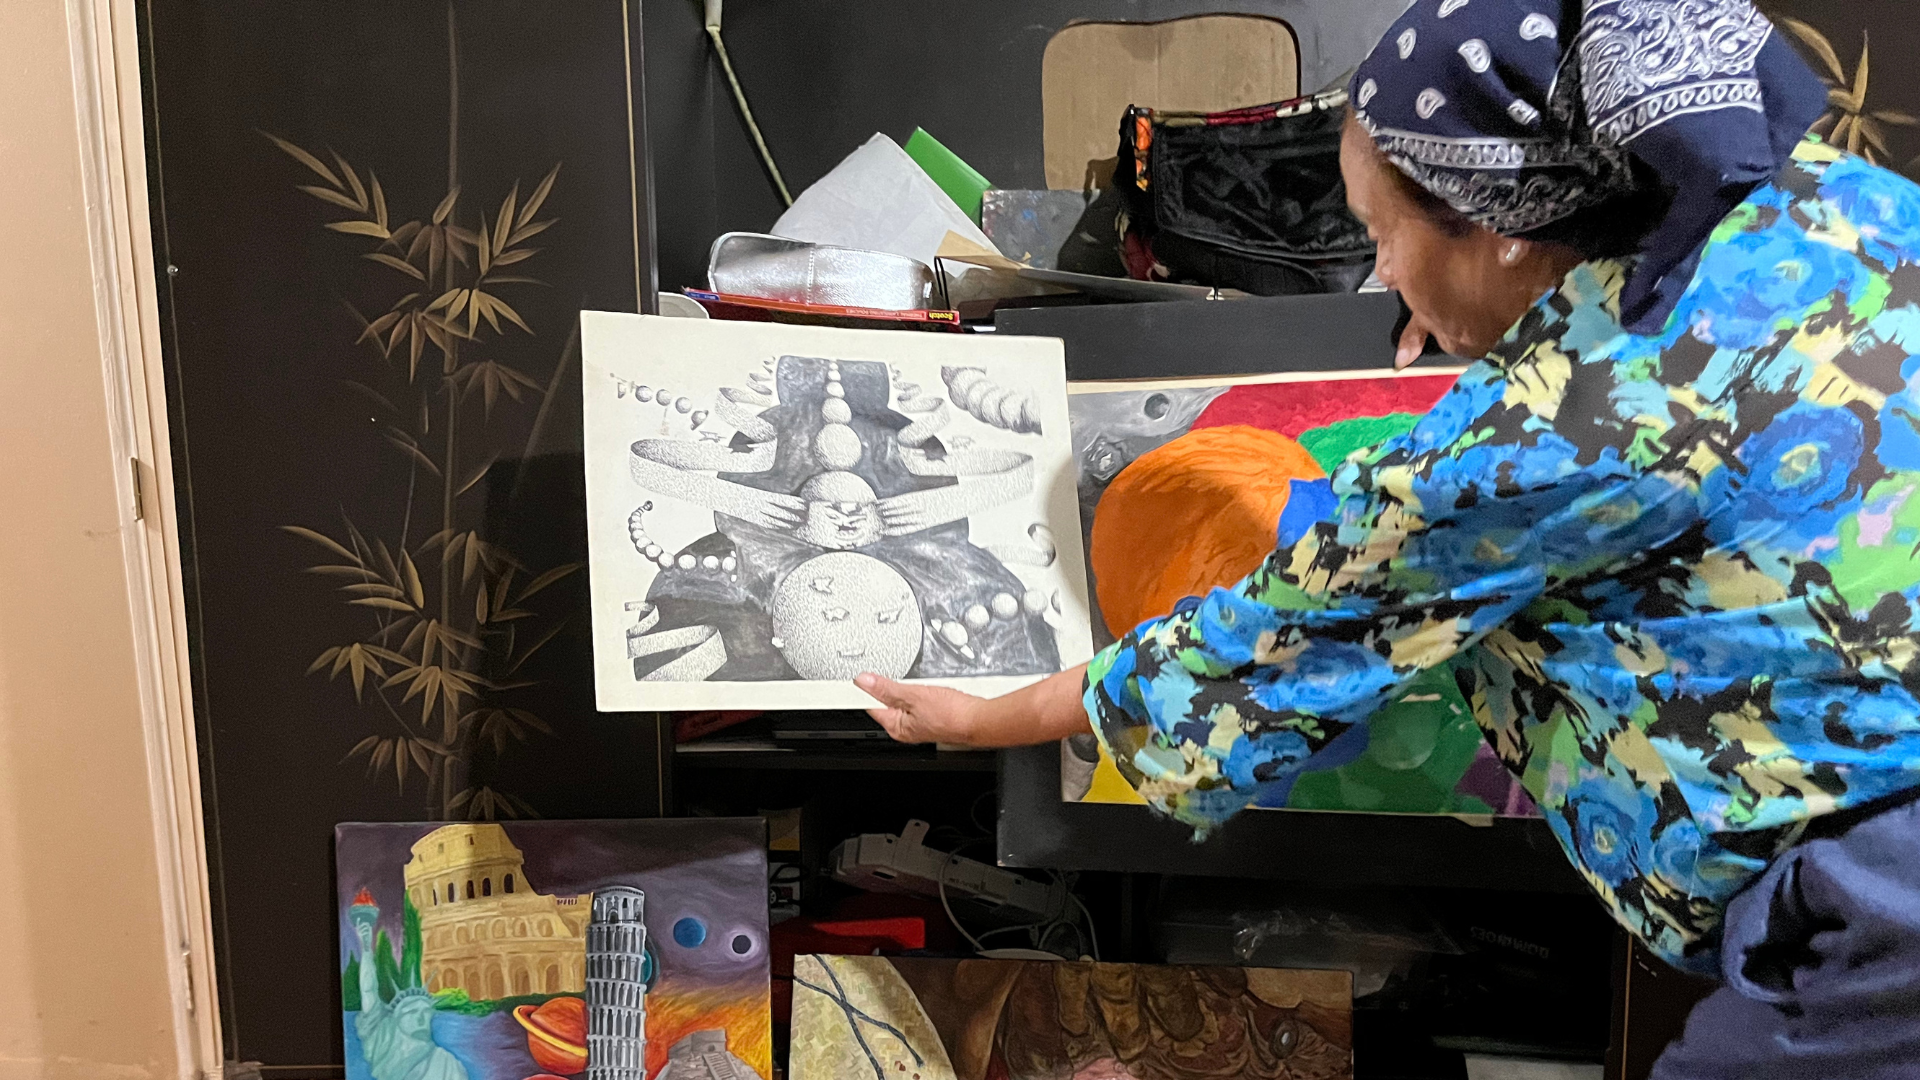 Génesis shows art that her children and grandchildren drew, which she keeps in a closet in her mobile home unit. (Alex Lubben / VICE News)